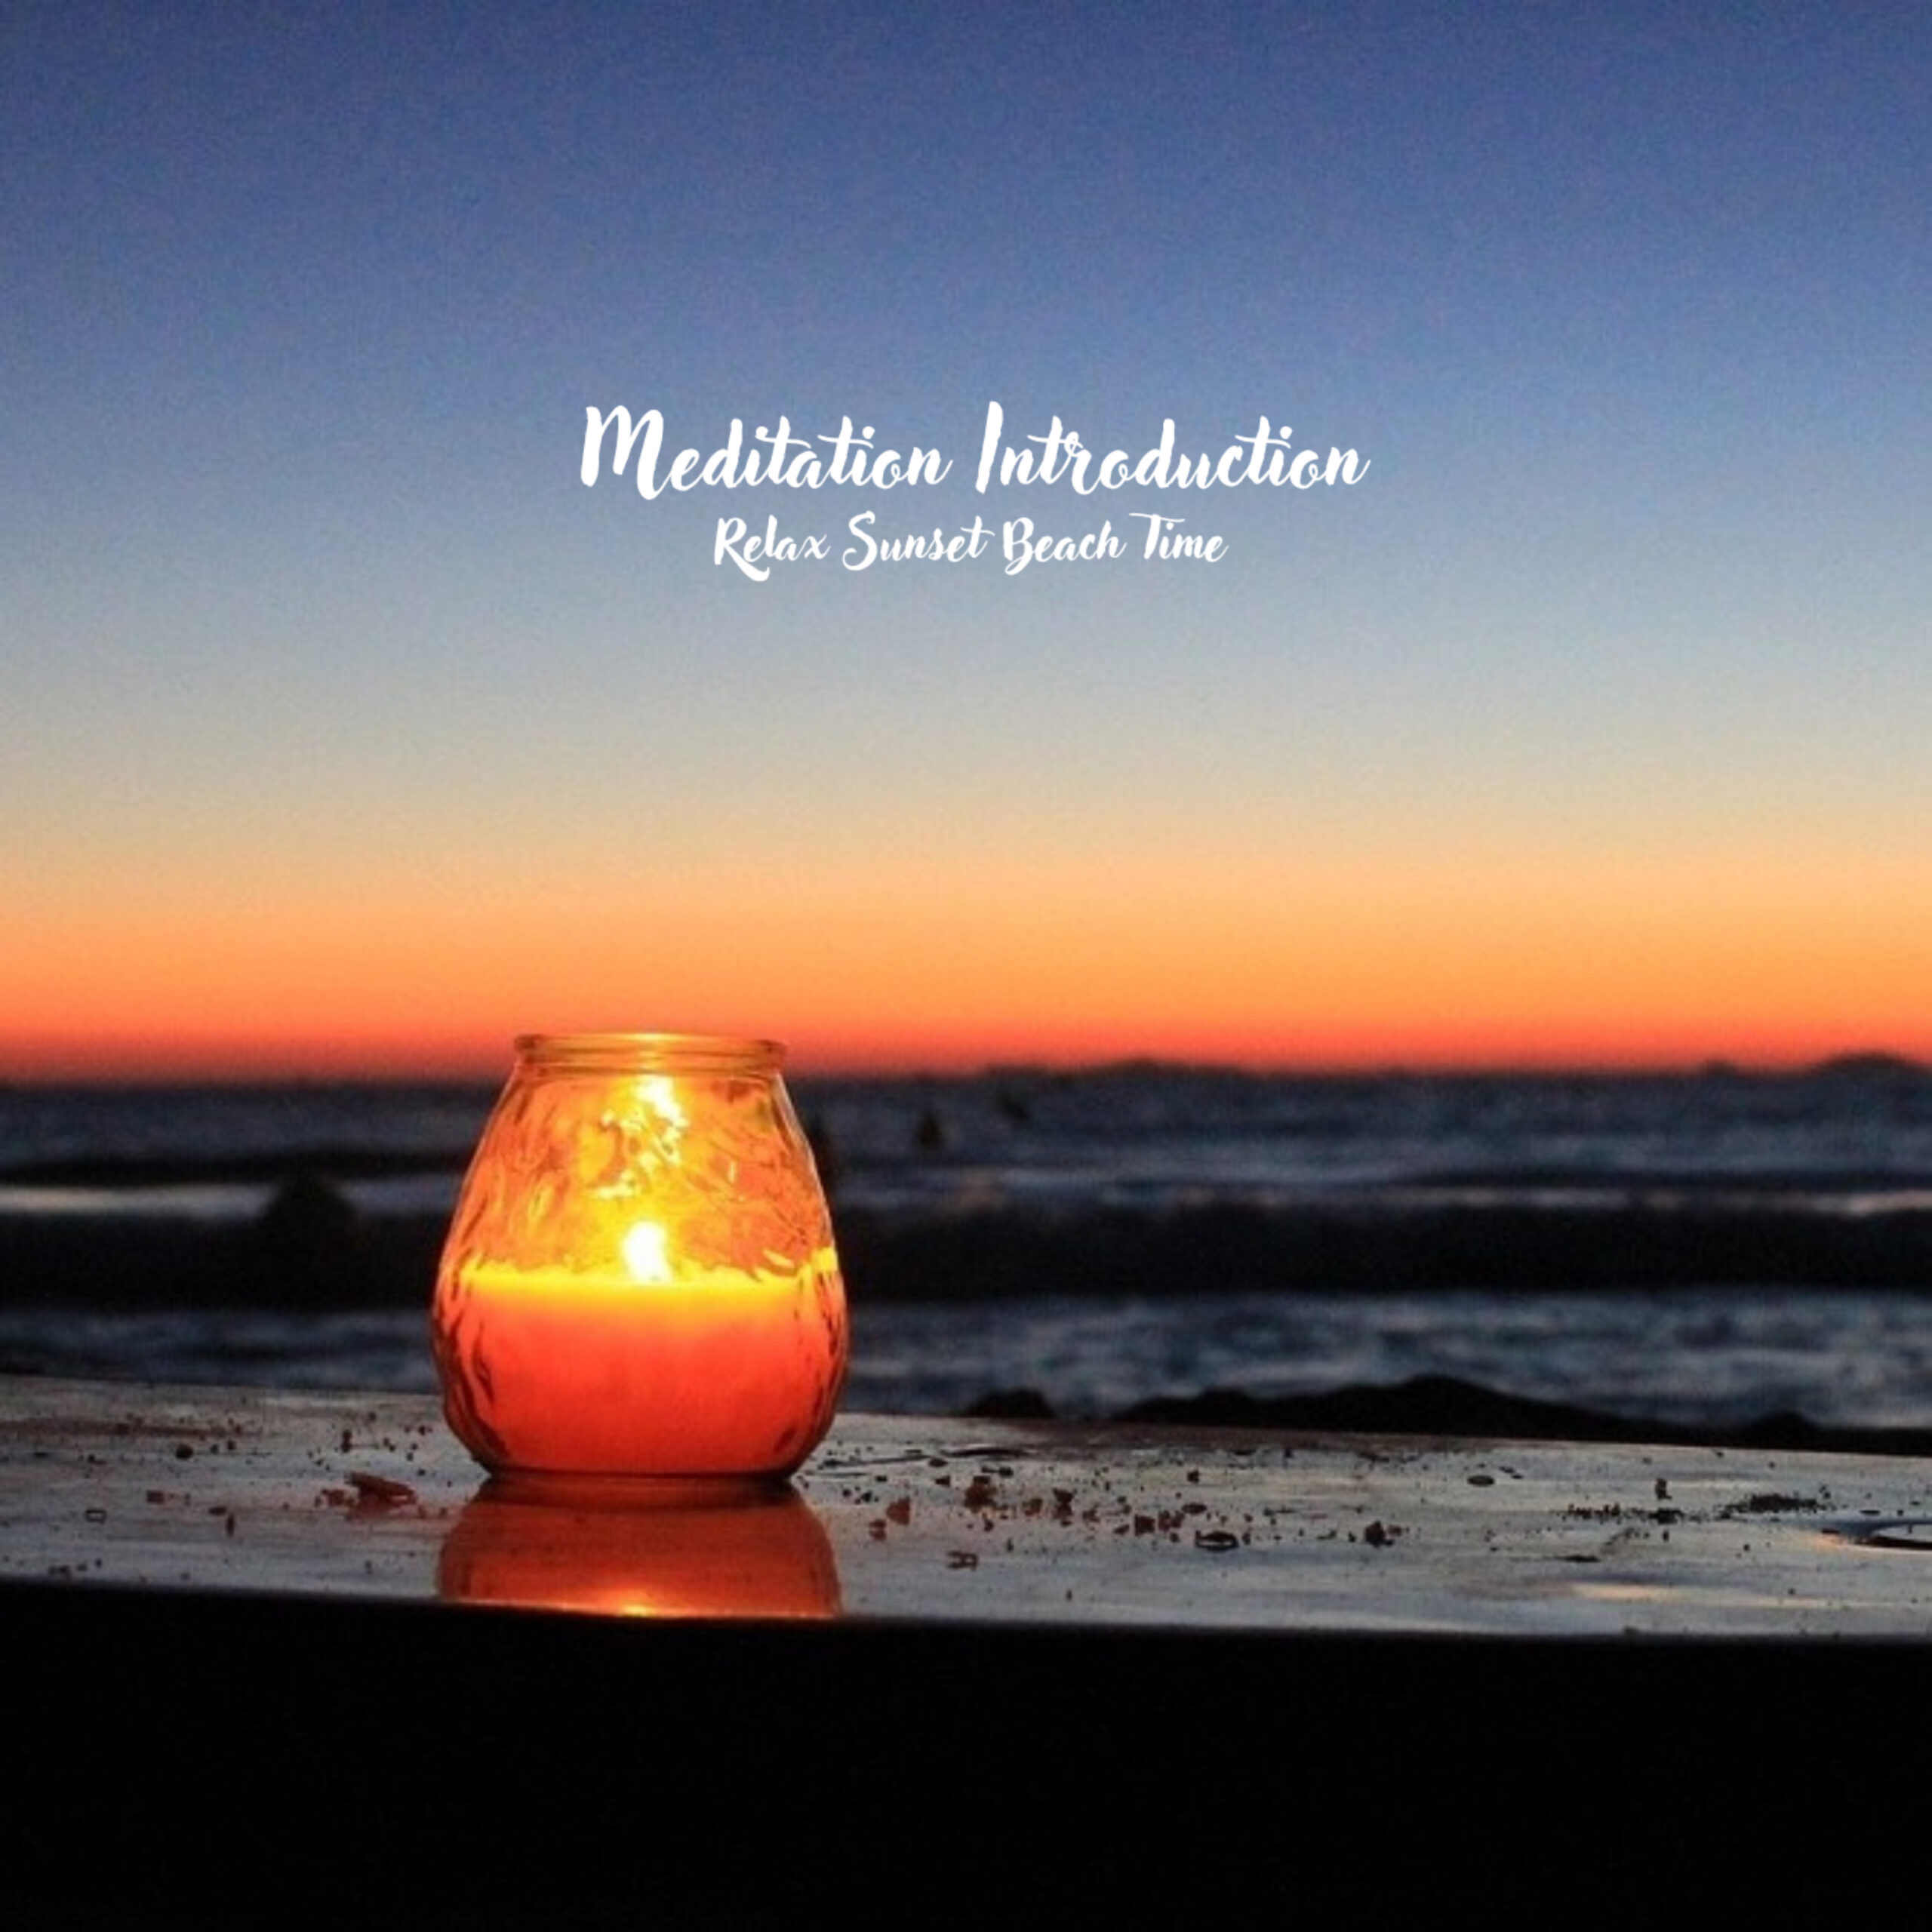 Meditation Introduction -Relax Sunset Beach Time- 瞑想用 作業用 休息用 癒し用